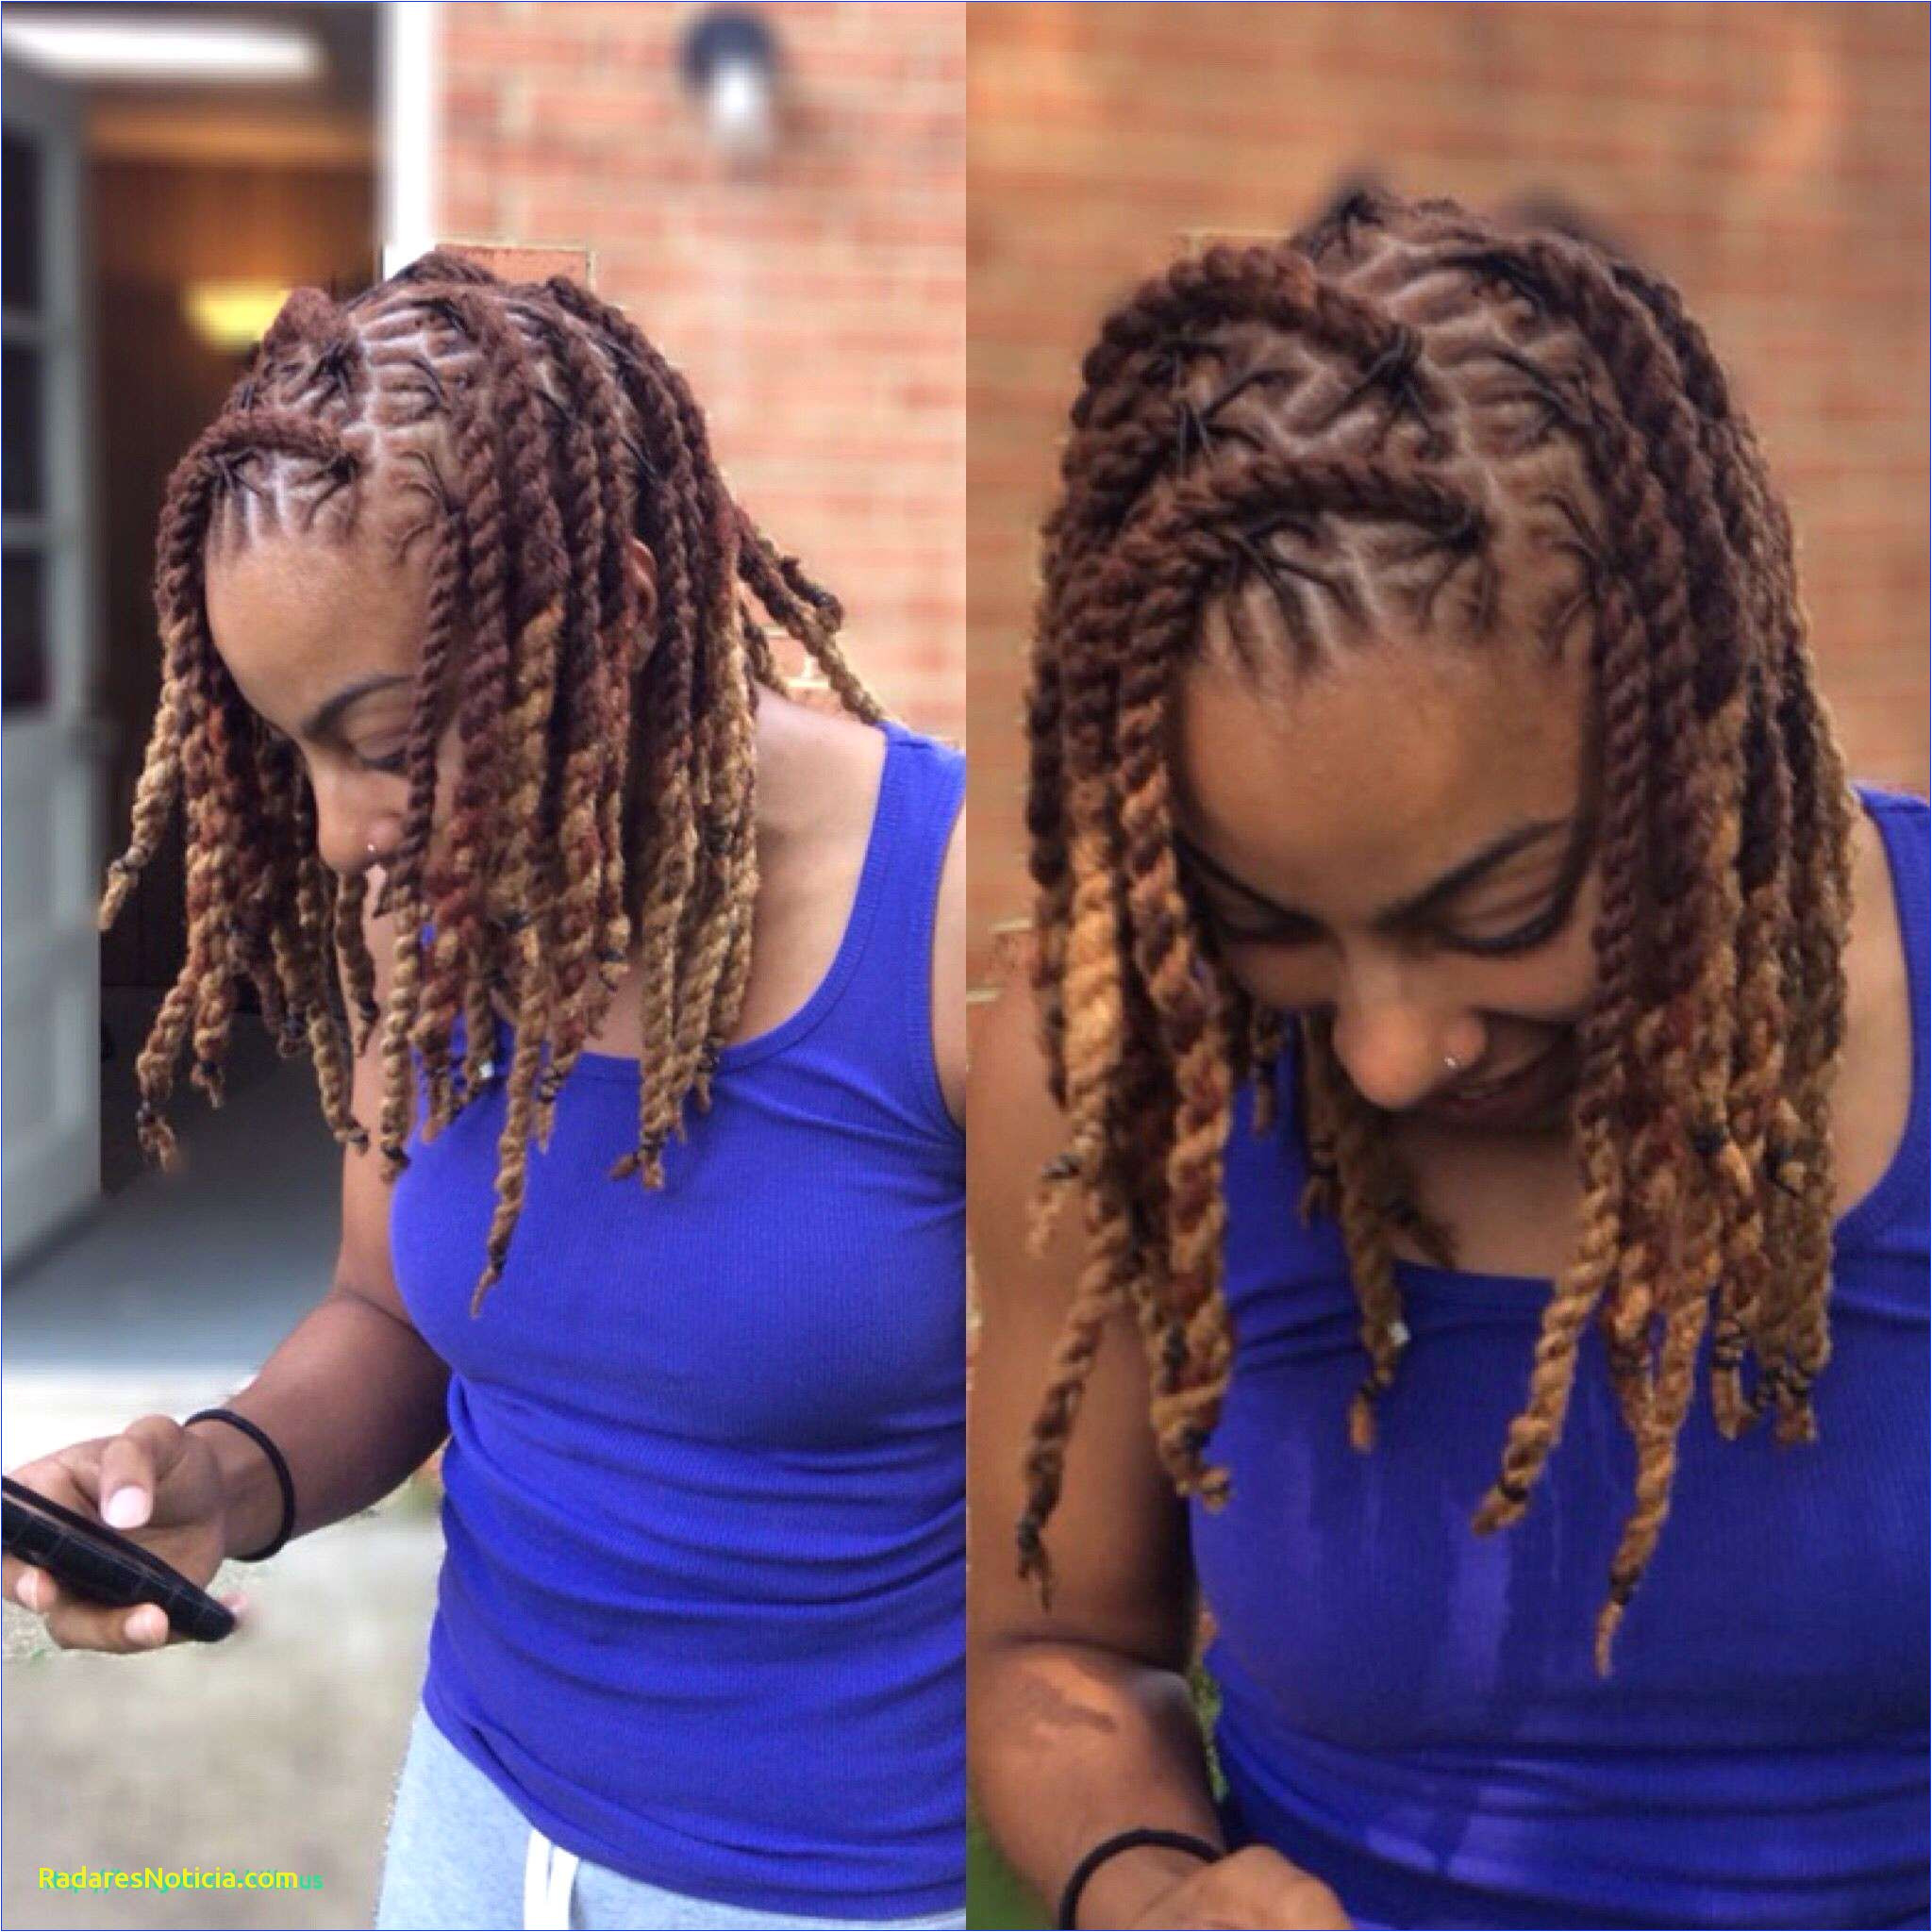 Dreadlocks Hairstyles Unique Hairstyles In Dreads Elegant Dreadlocks Hairstyles 0d